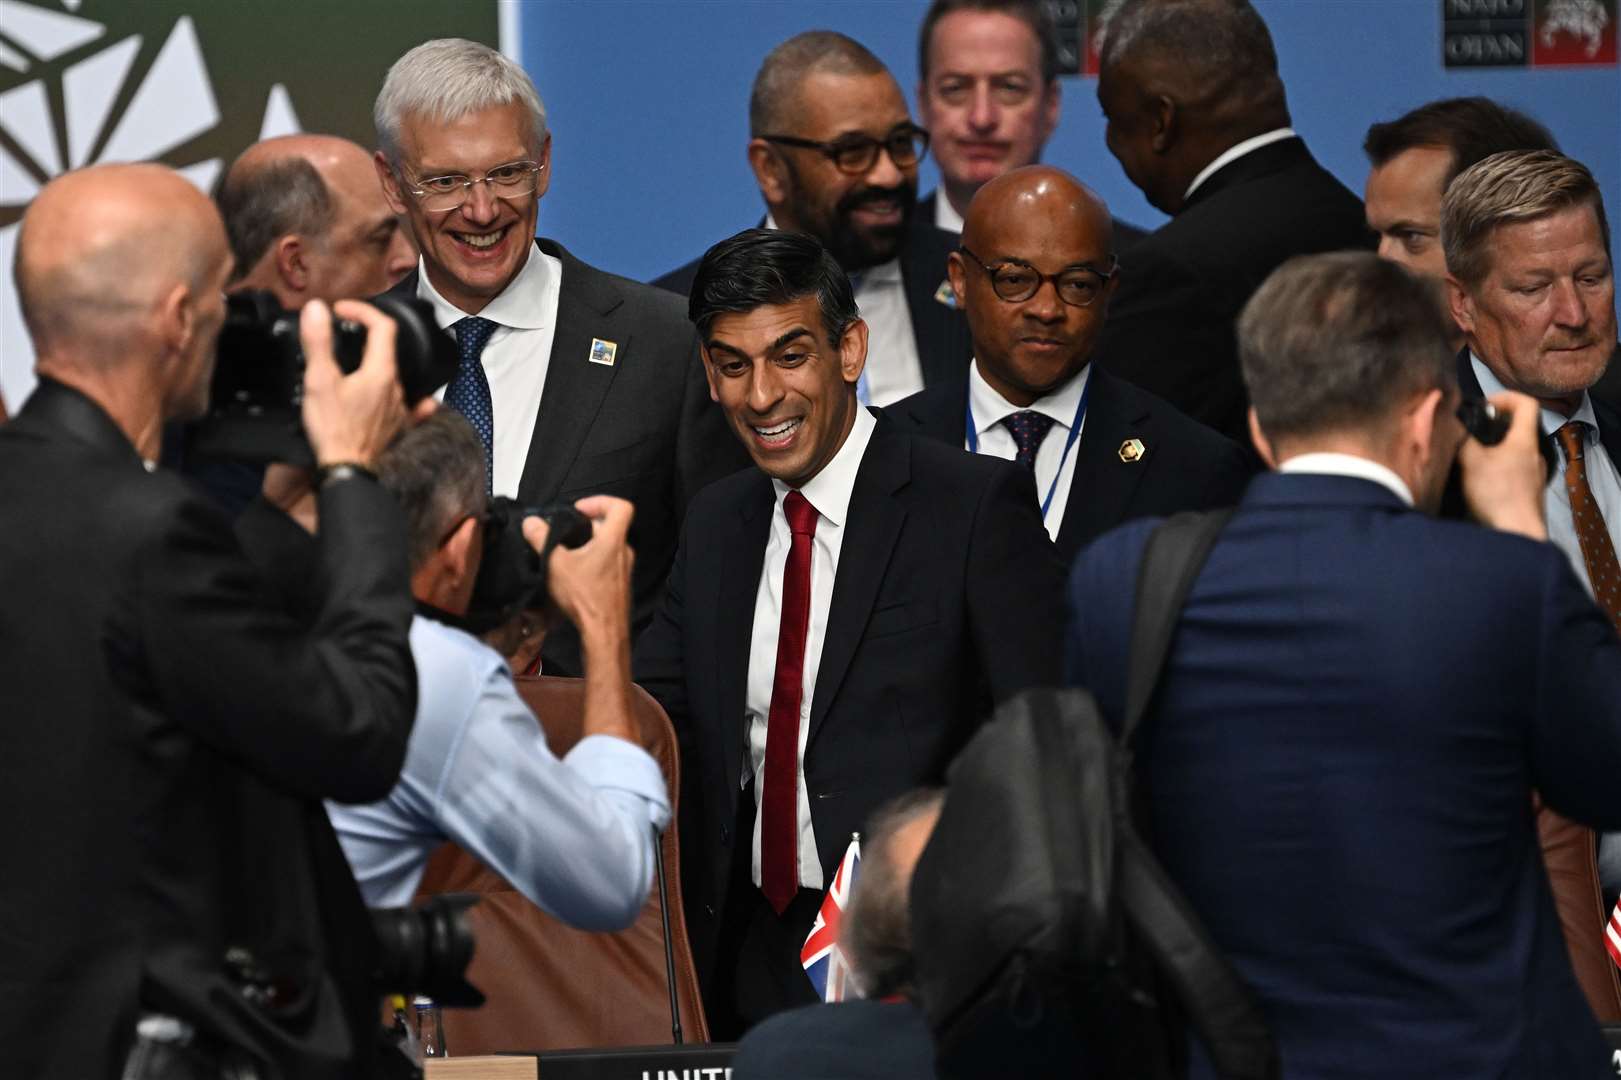 Prime Minister Rishi Sunak took part in a Nato leaders’ meeting on Tuesday in Vilnius (Paul Ellis/PA)